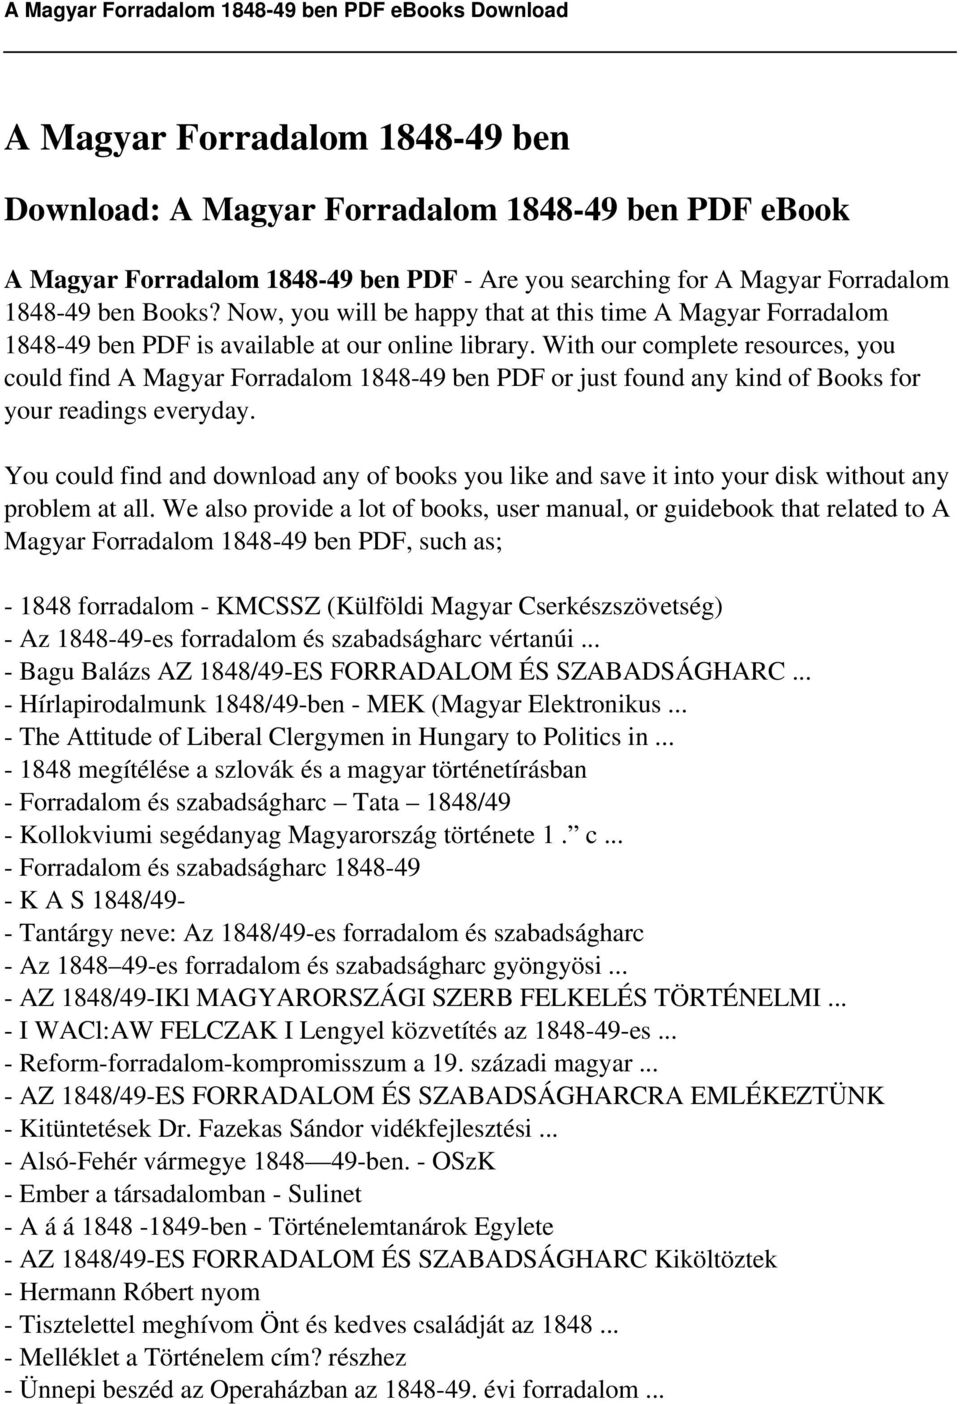 With our complete resources, you could find A Magyar Forradalom 1848-49 ben PDF or just found any kind of Books for your readings everyday.